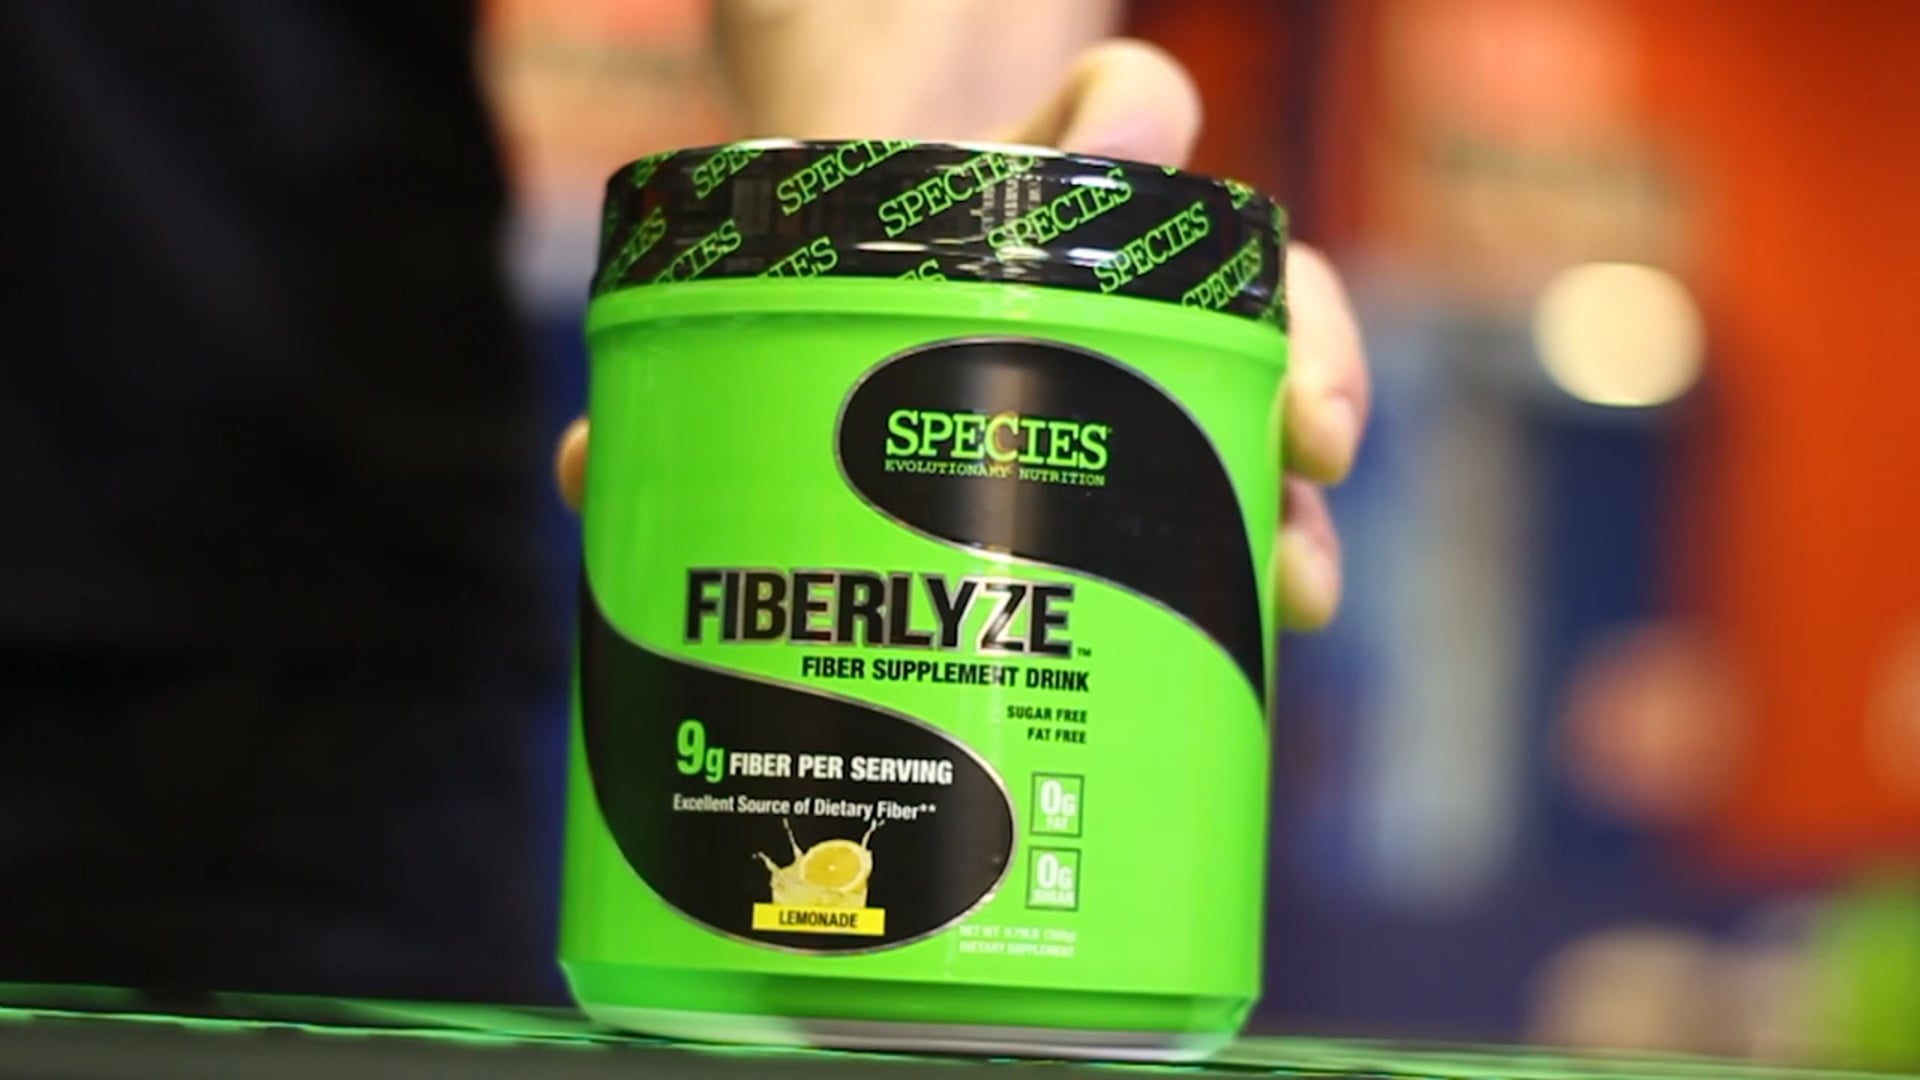 Dave Palumbo Discusses FIBERLYZE™ by SPECIES Nutrition